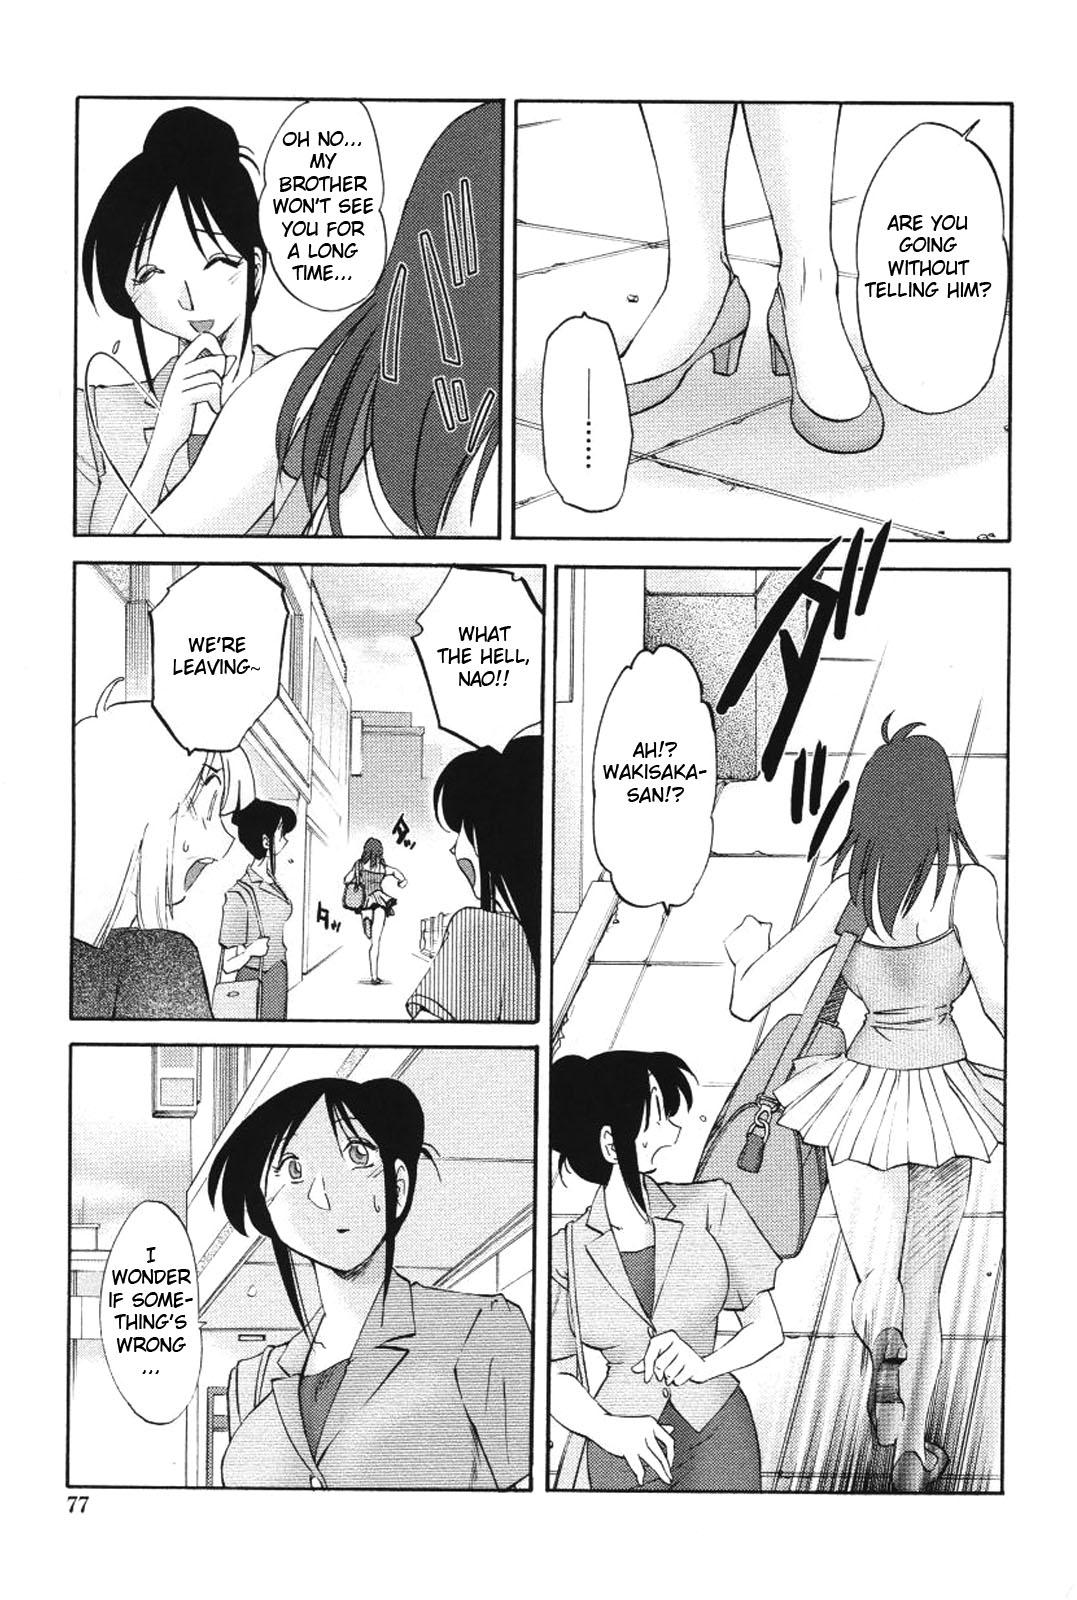 Camgirls My Sister is My Wife Chapter 12 (English) Translated by Fated Cricle Hot Women Having Sex - Page 7